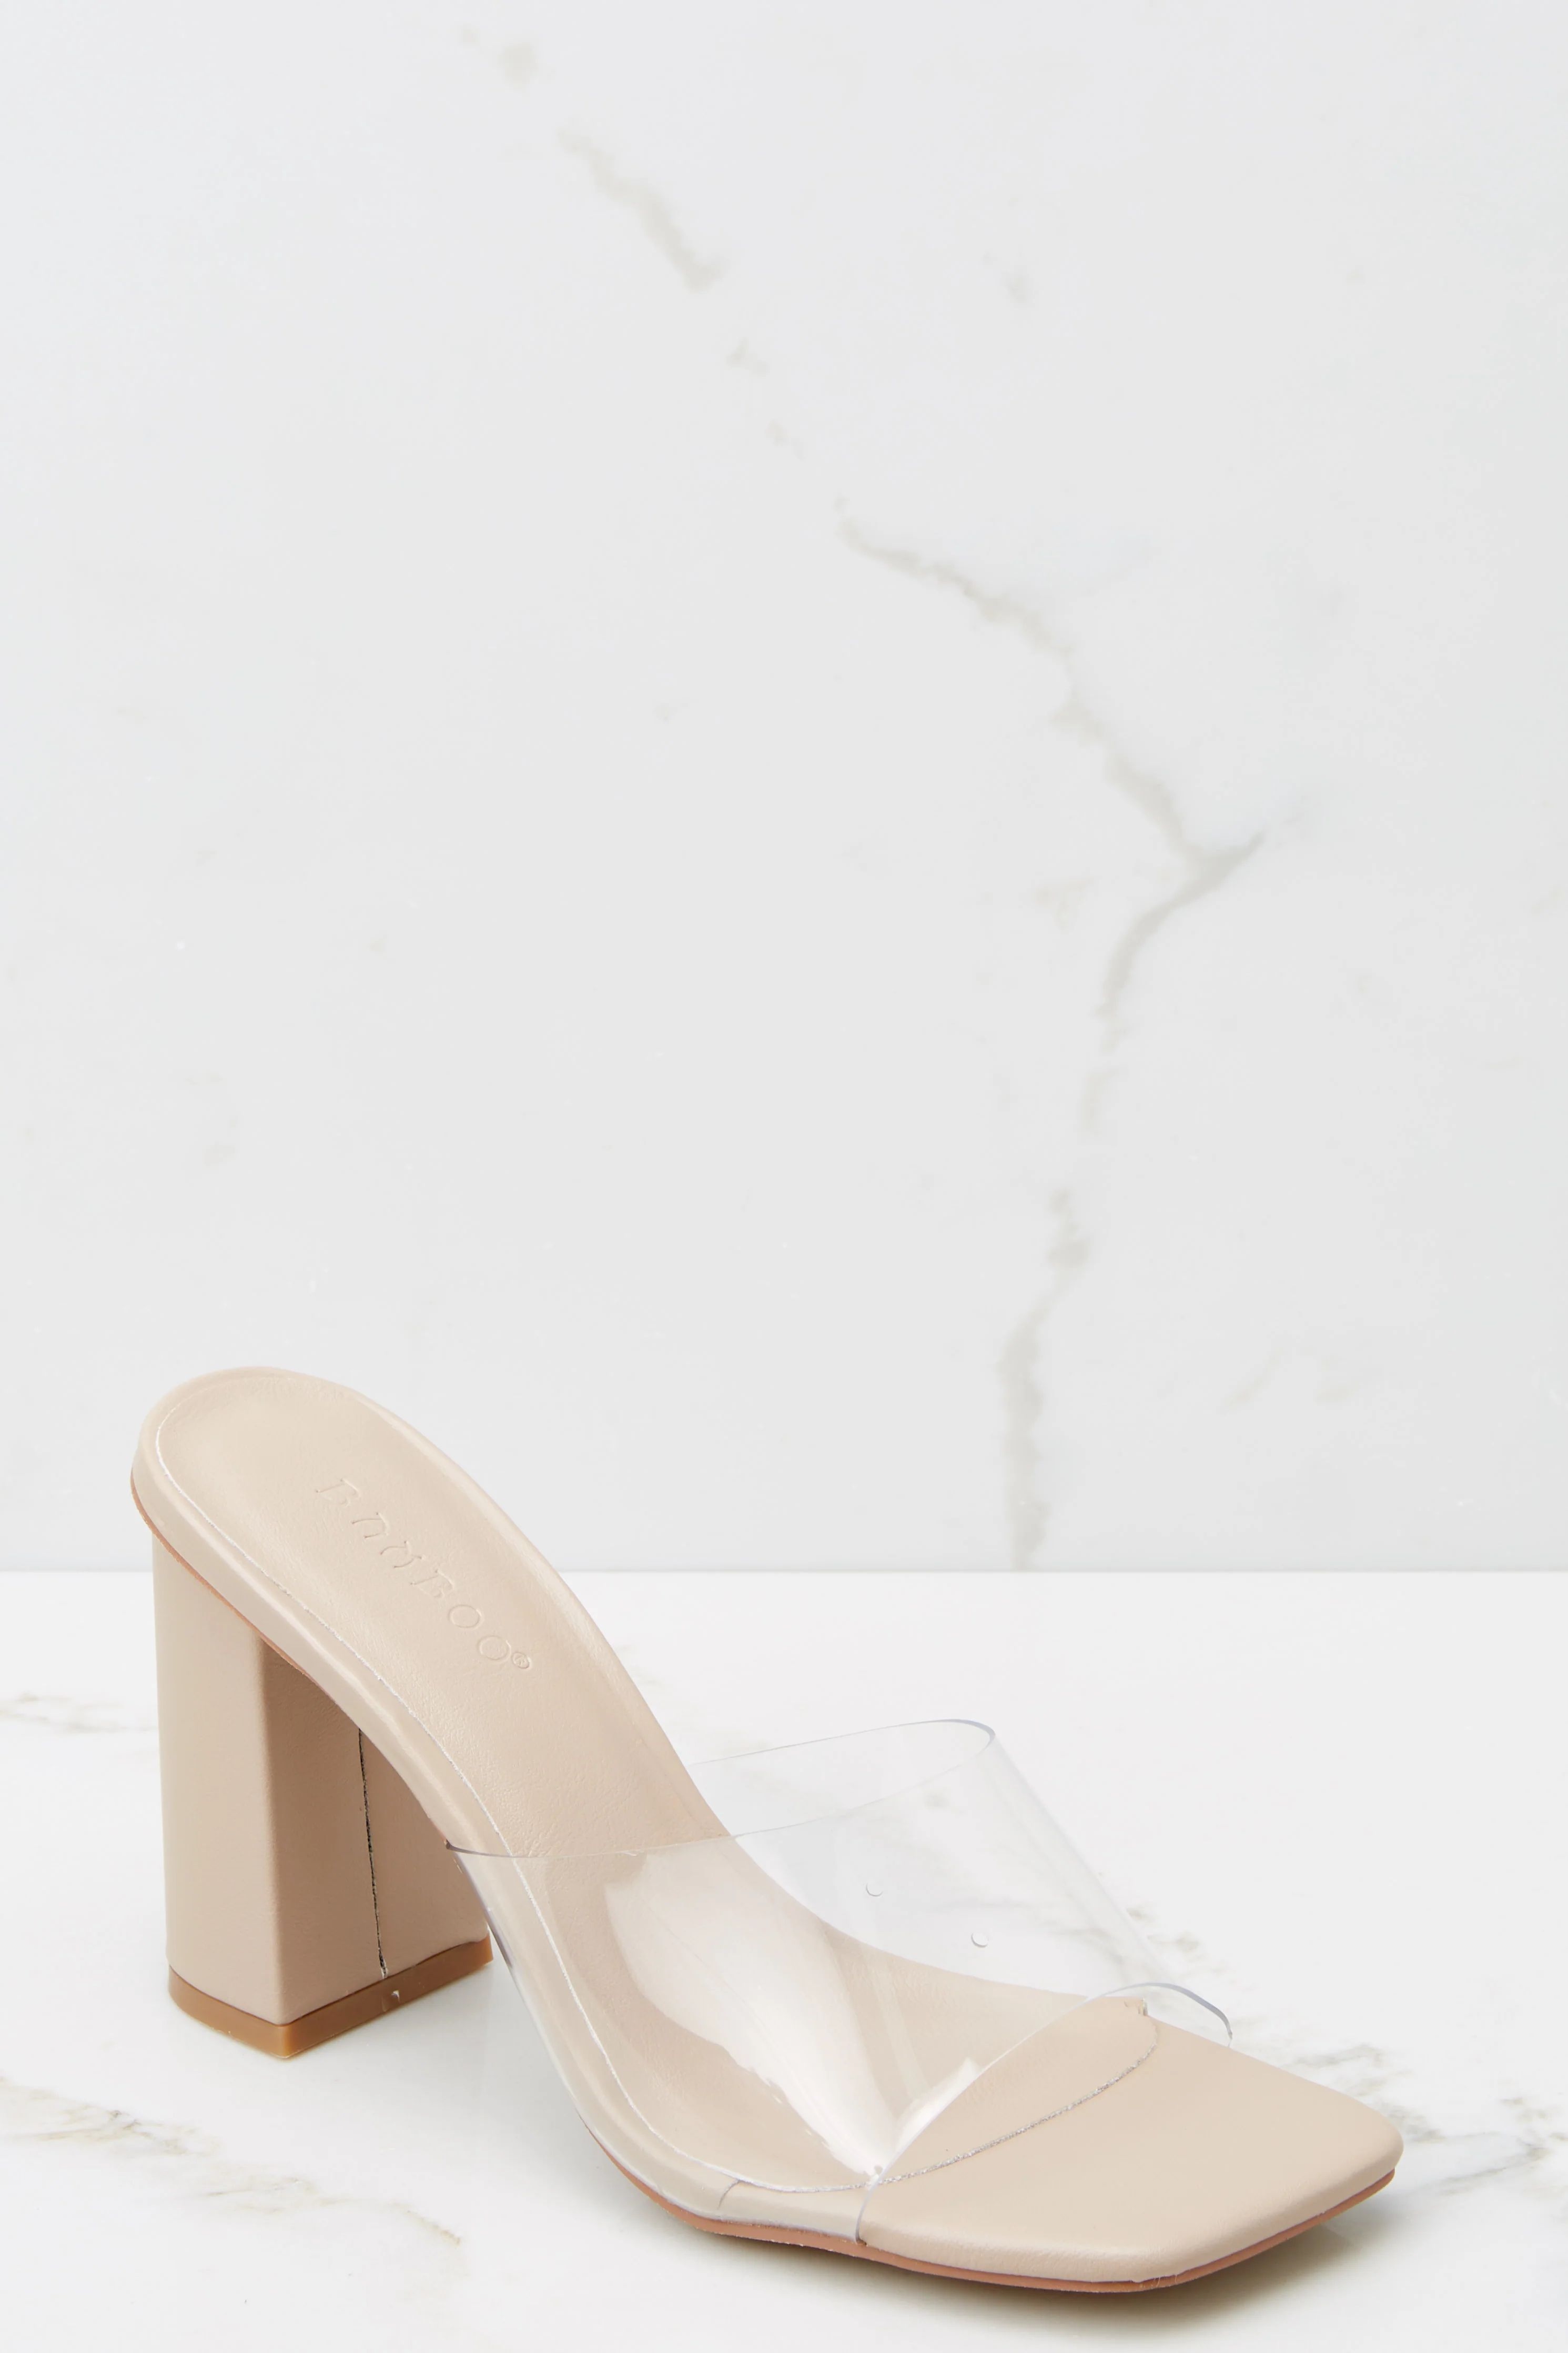 Be Seeing You Clear And Nude High Heel Sandals | Red Dress 